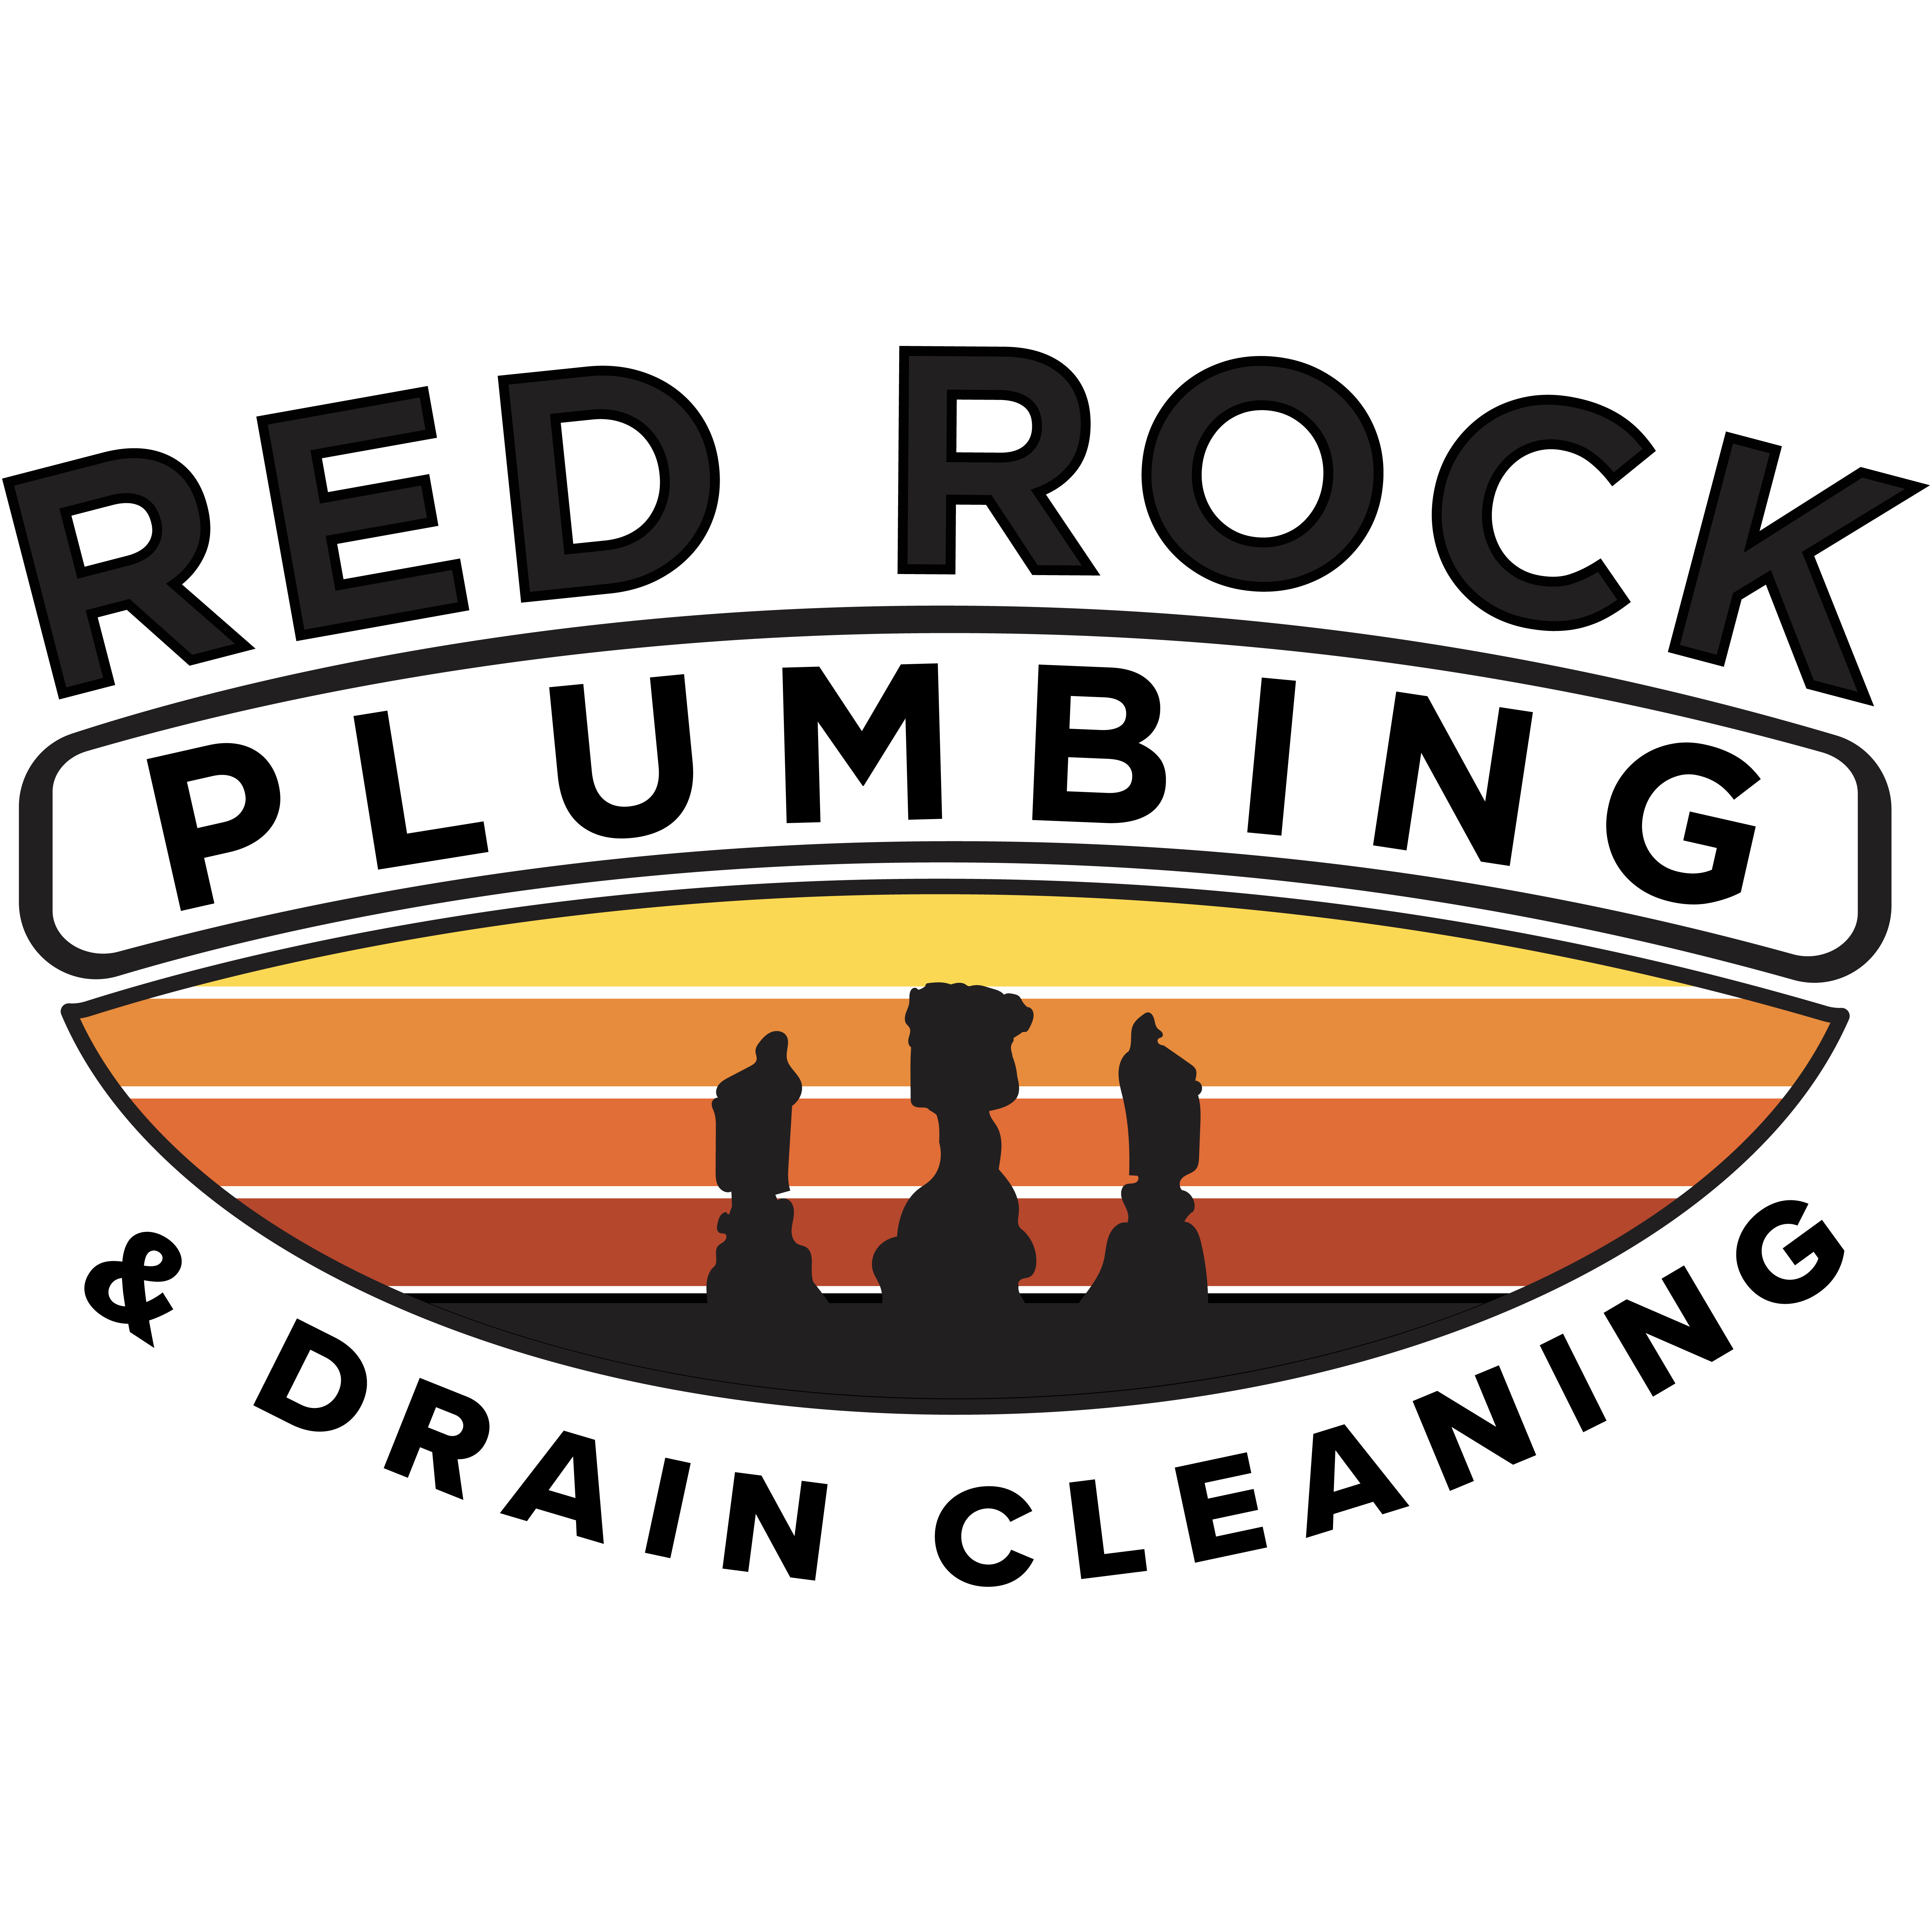 Red Rock Plumbing and Drain Cleaning - St. George, UT 84790 - (435)215-7553 | ShowMeLocal.com